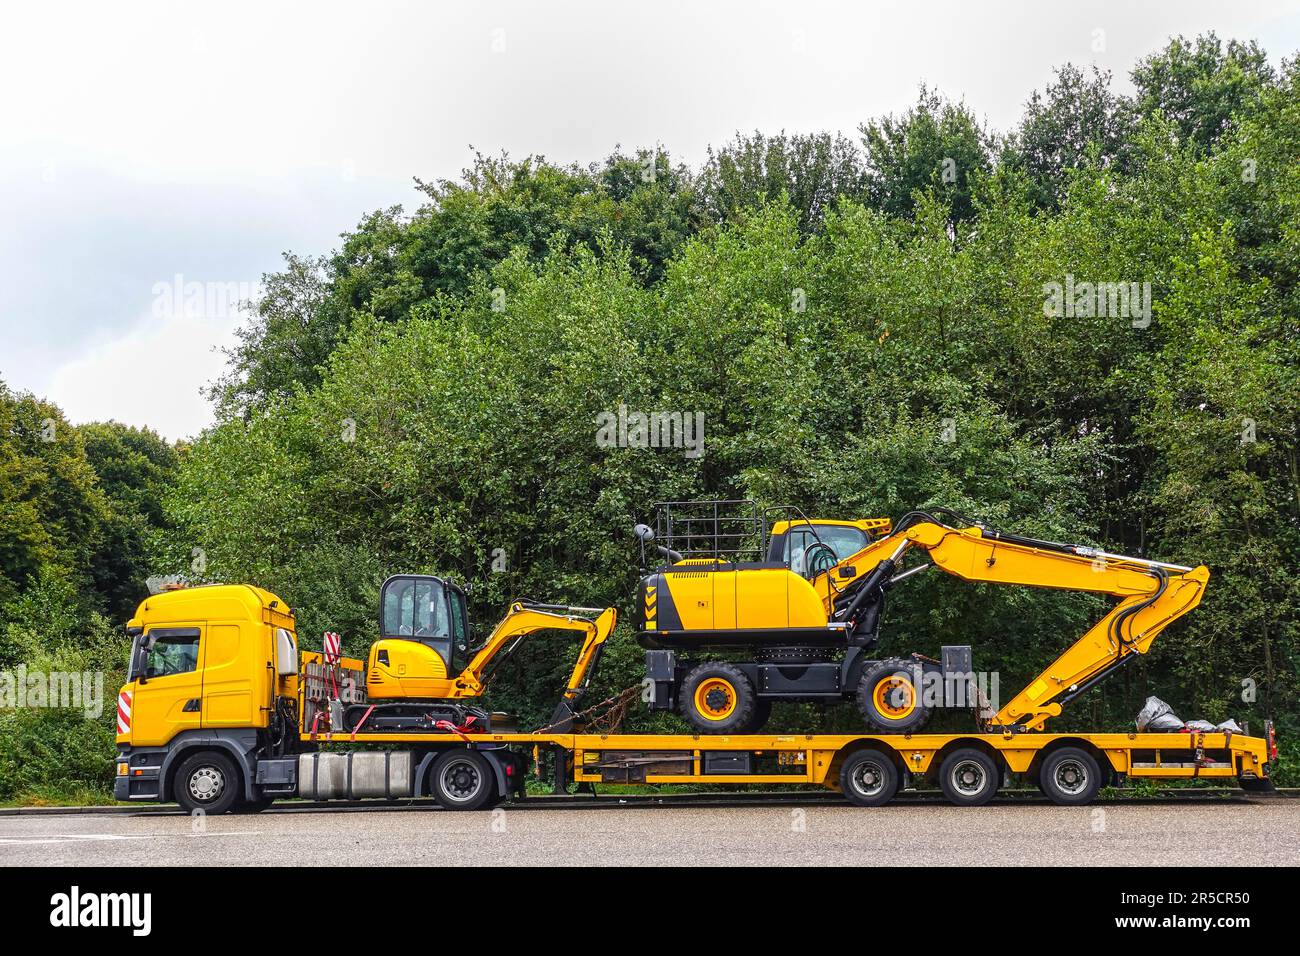 Low loader trailer carrying two excavators parking on a public truck parking area of a truck stop. Stock Photo